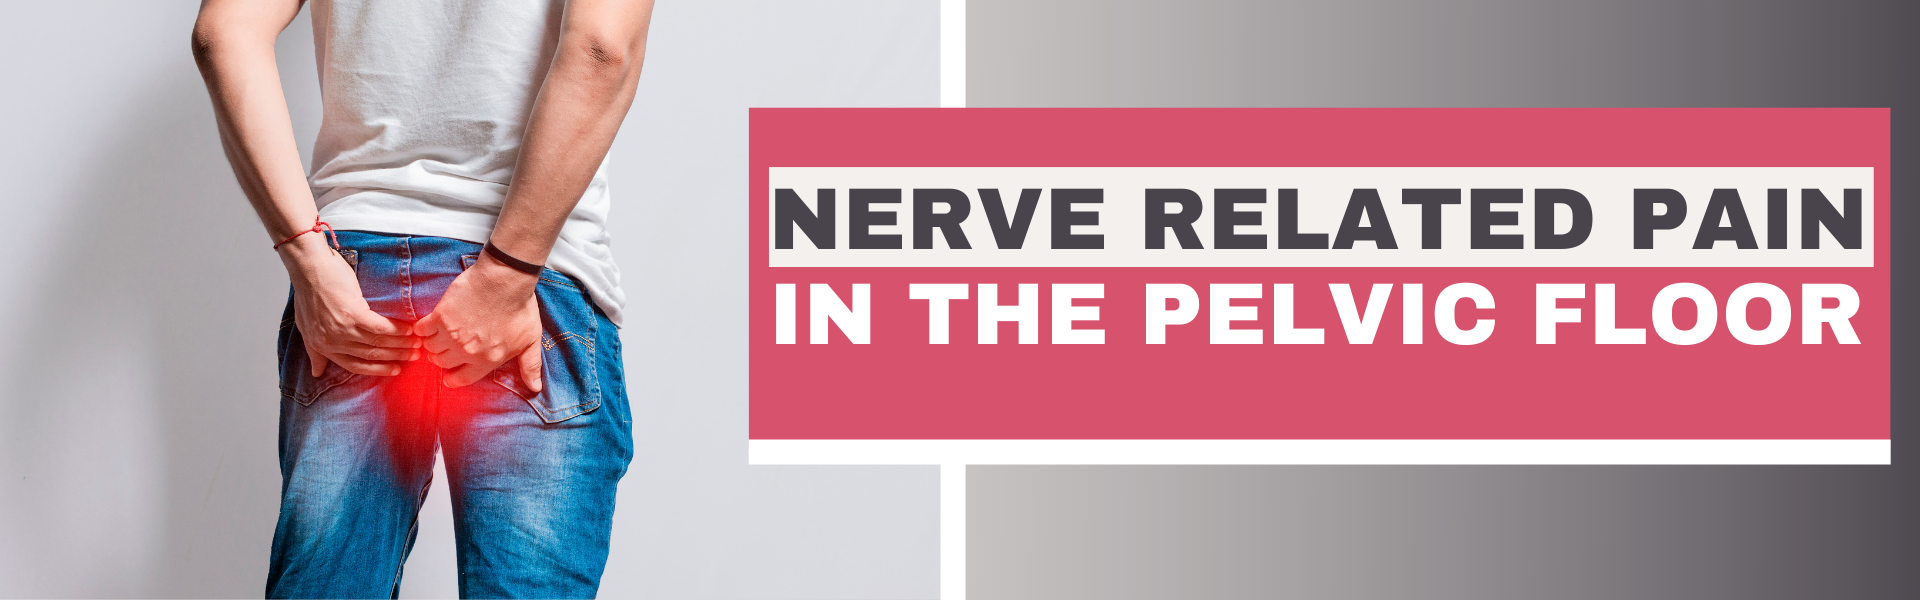 Nerve Related Pain in The Pelvic Floor